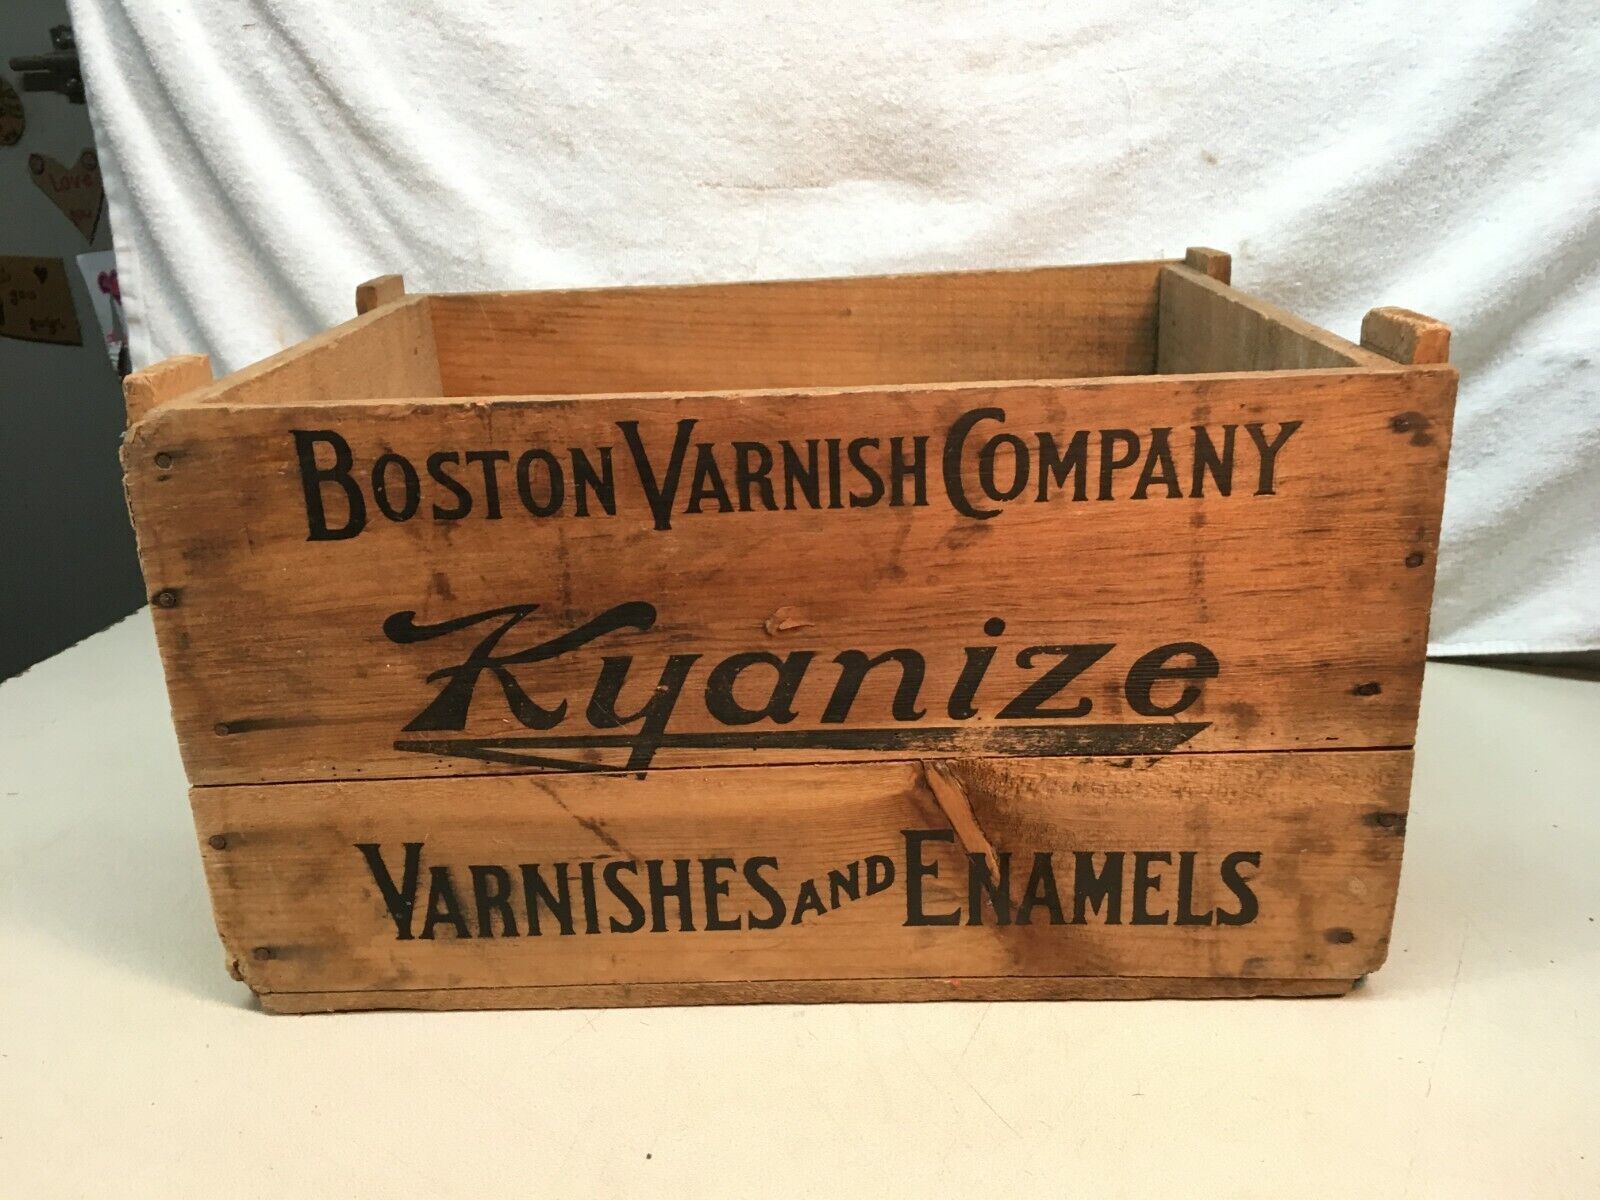 Antique Boston Varnish Company Wood Packing Crate Kyanize Varnish and Enamels 